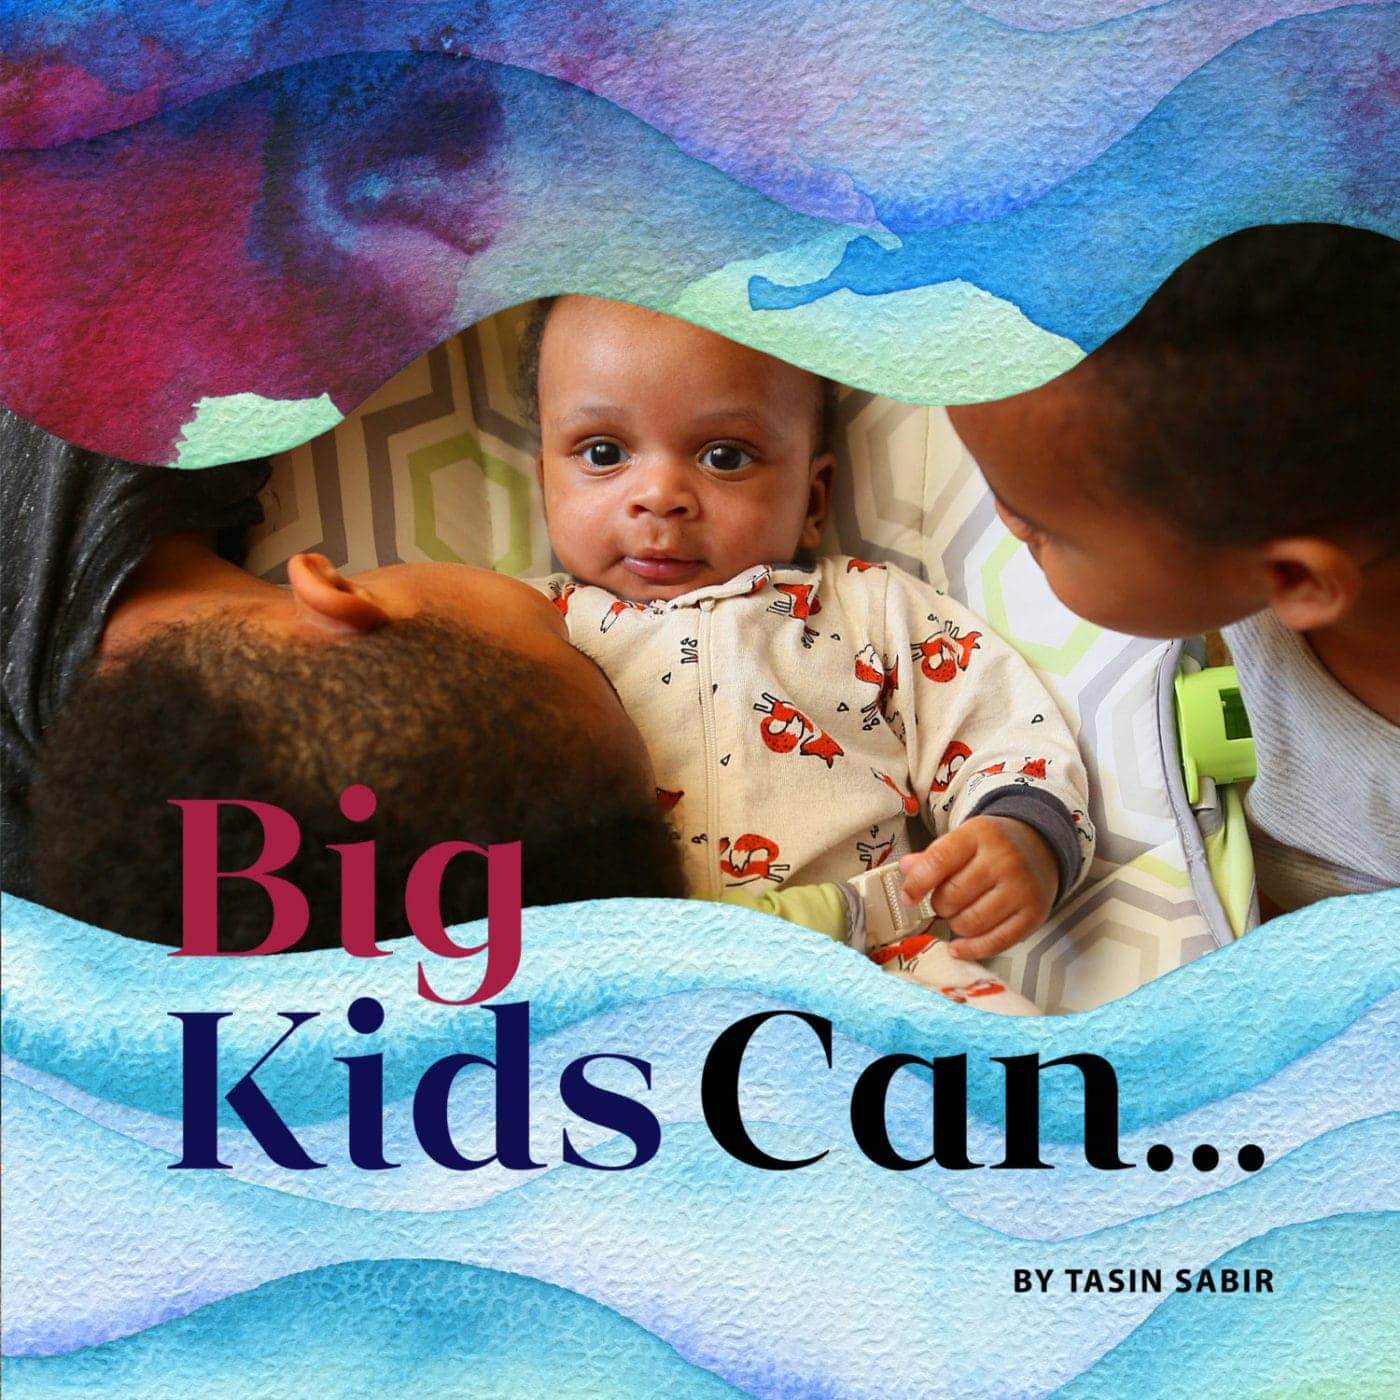 Big-Kids-Can-book-by-TaSin-Sabir-1400x1400, TaSin Sabir on creative parenting and her first children’s book, Culture Currents News & Views 